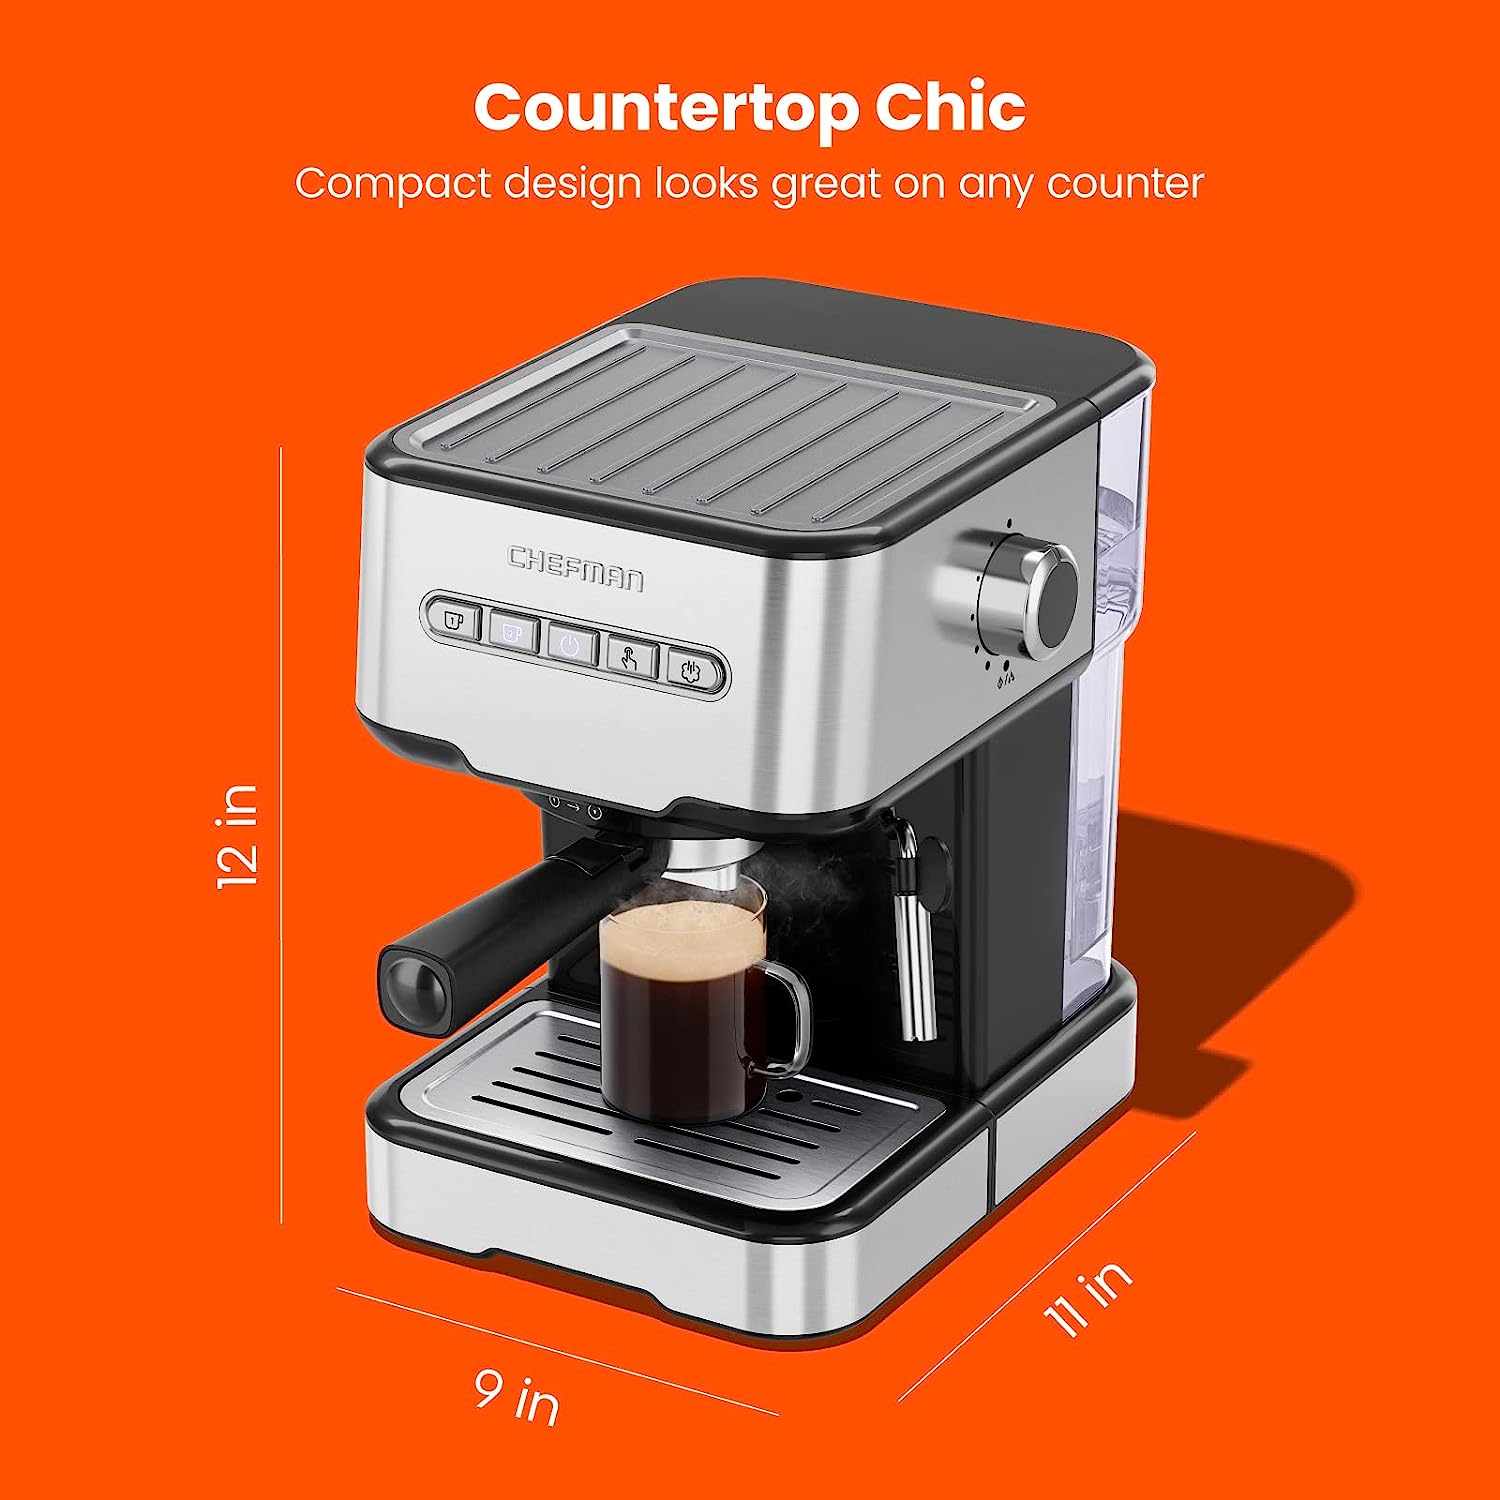 https://bigbigmart.com/wp-content/uploads/2023/07/Chefman-6-in-1-Espresso-Machine-with-Steamer-One-Touch-Single-or-Double-Shot-Espresso-Maker-Coffee-Maker-Cappuccino-Machine-Latte-Maker-Built-In-Milk-Frother-Coffee-Machine-Stainless-Steel0.jpg